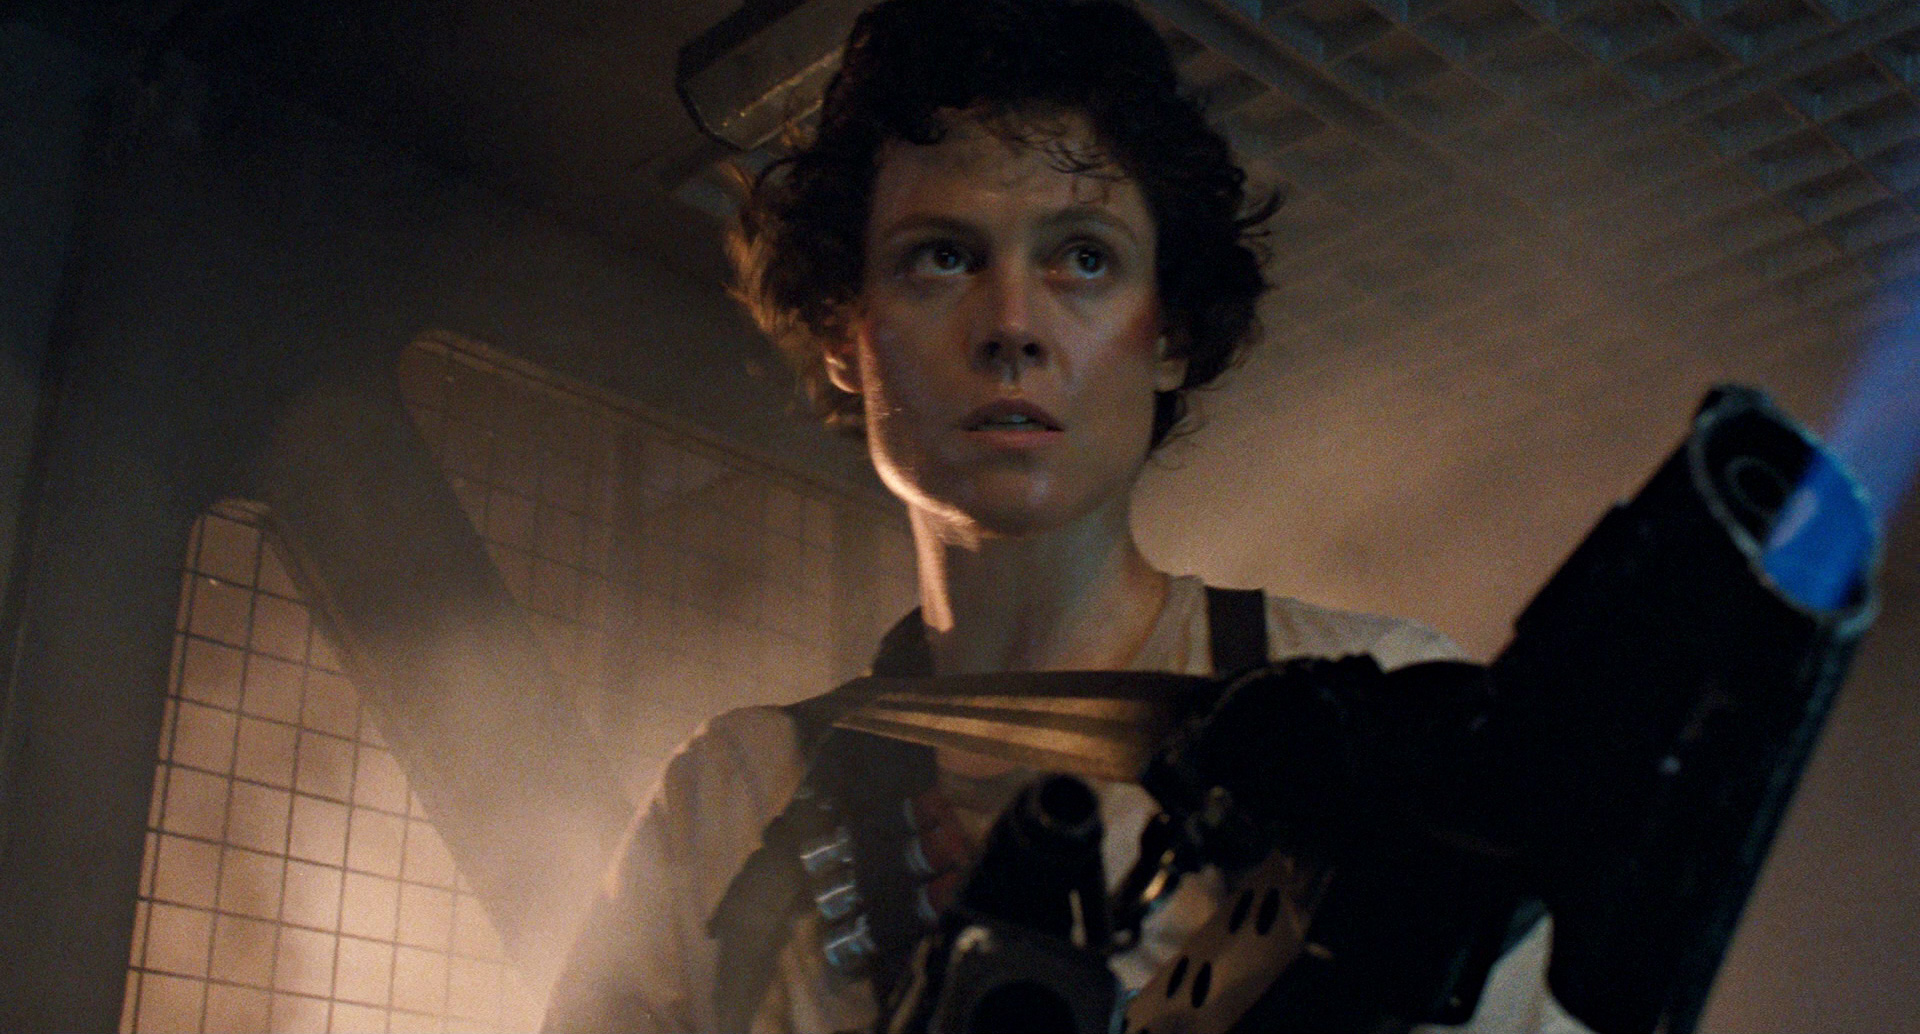 According to Deadline, veteran actress Sigourney Weaver is in talks for a key role in The Mandalorian and Grogu.